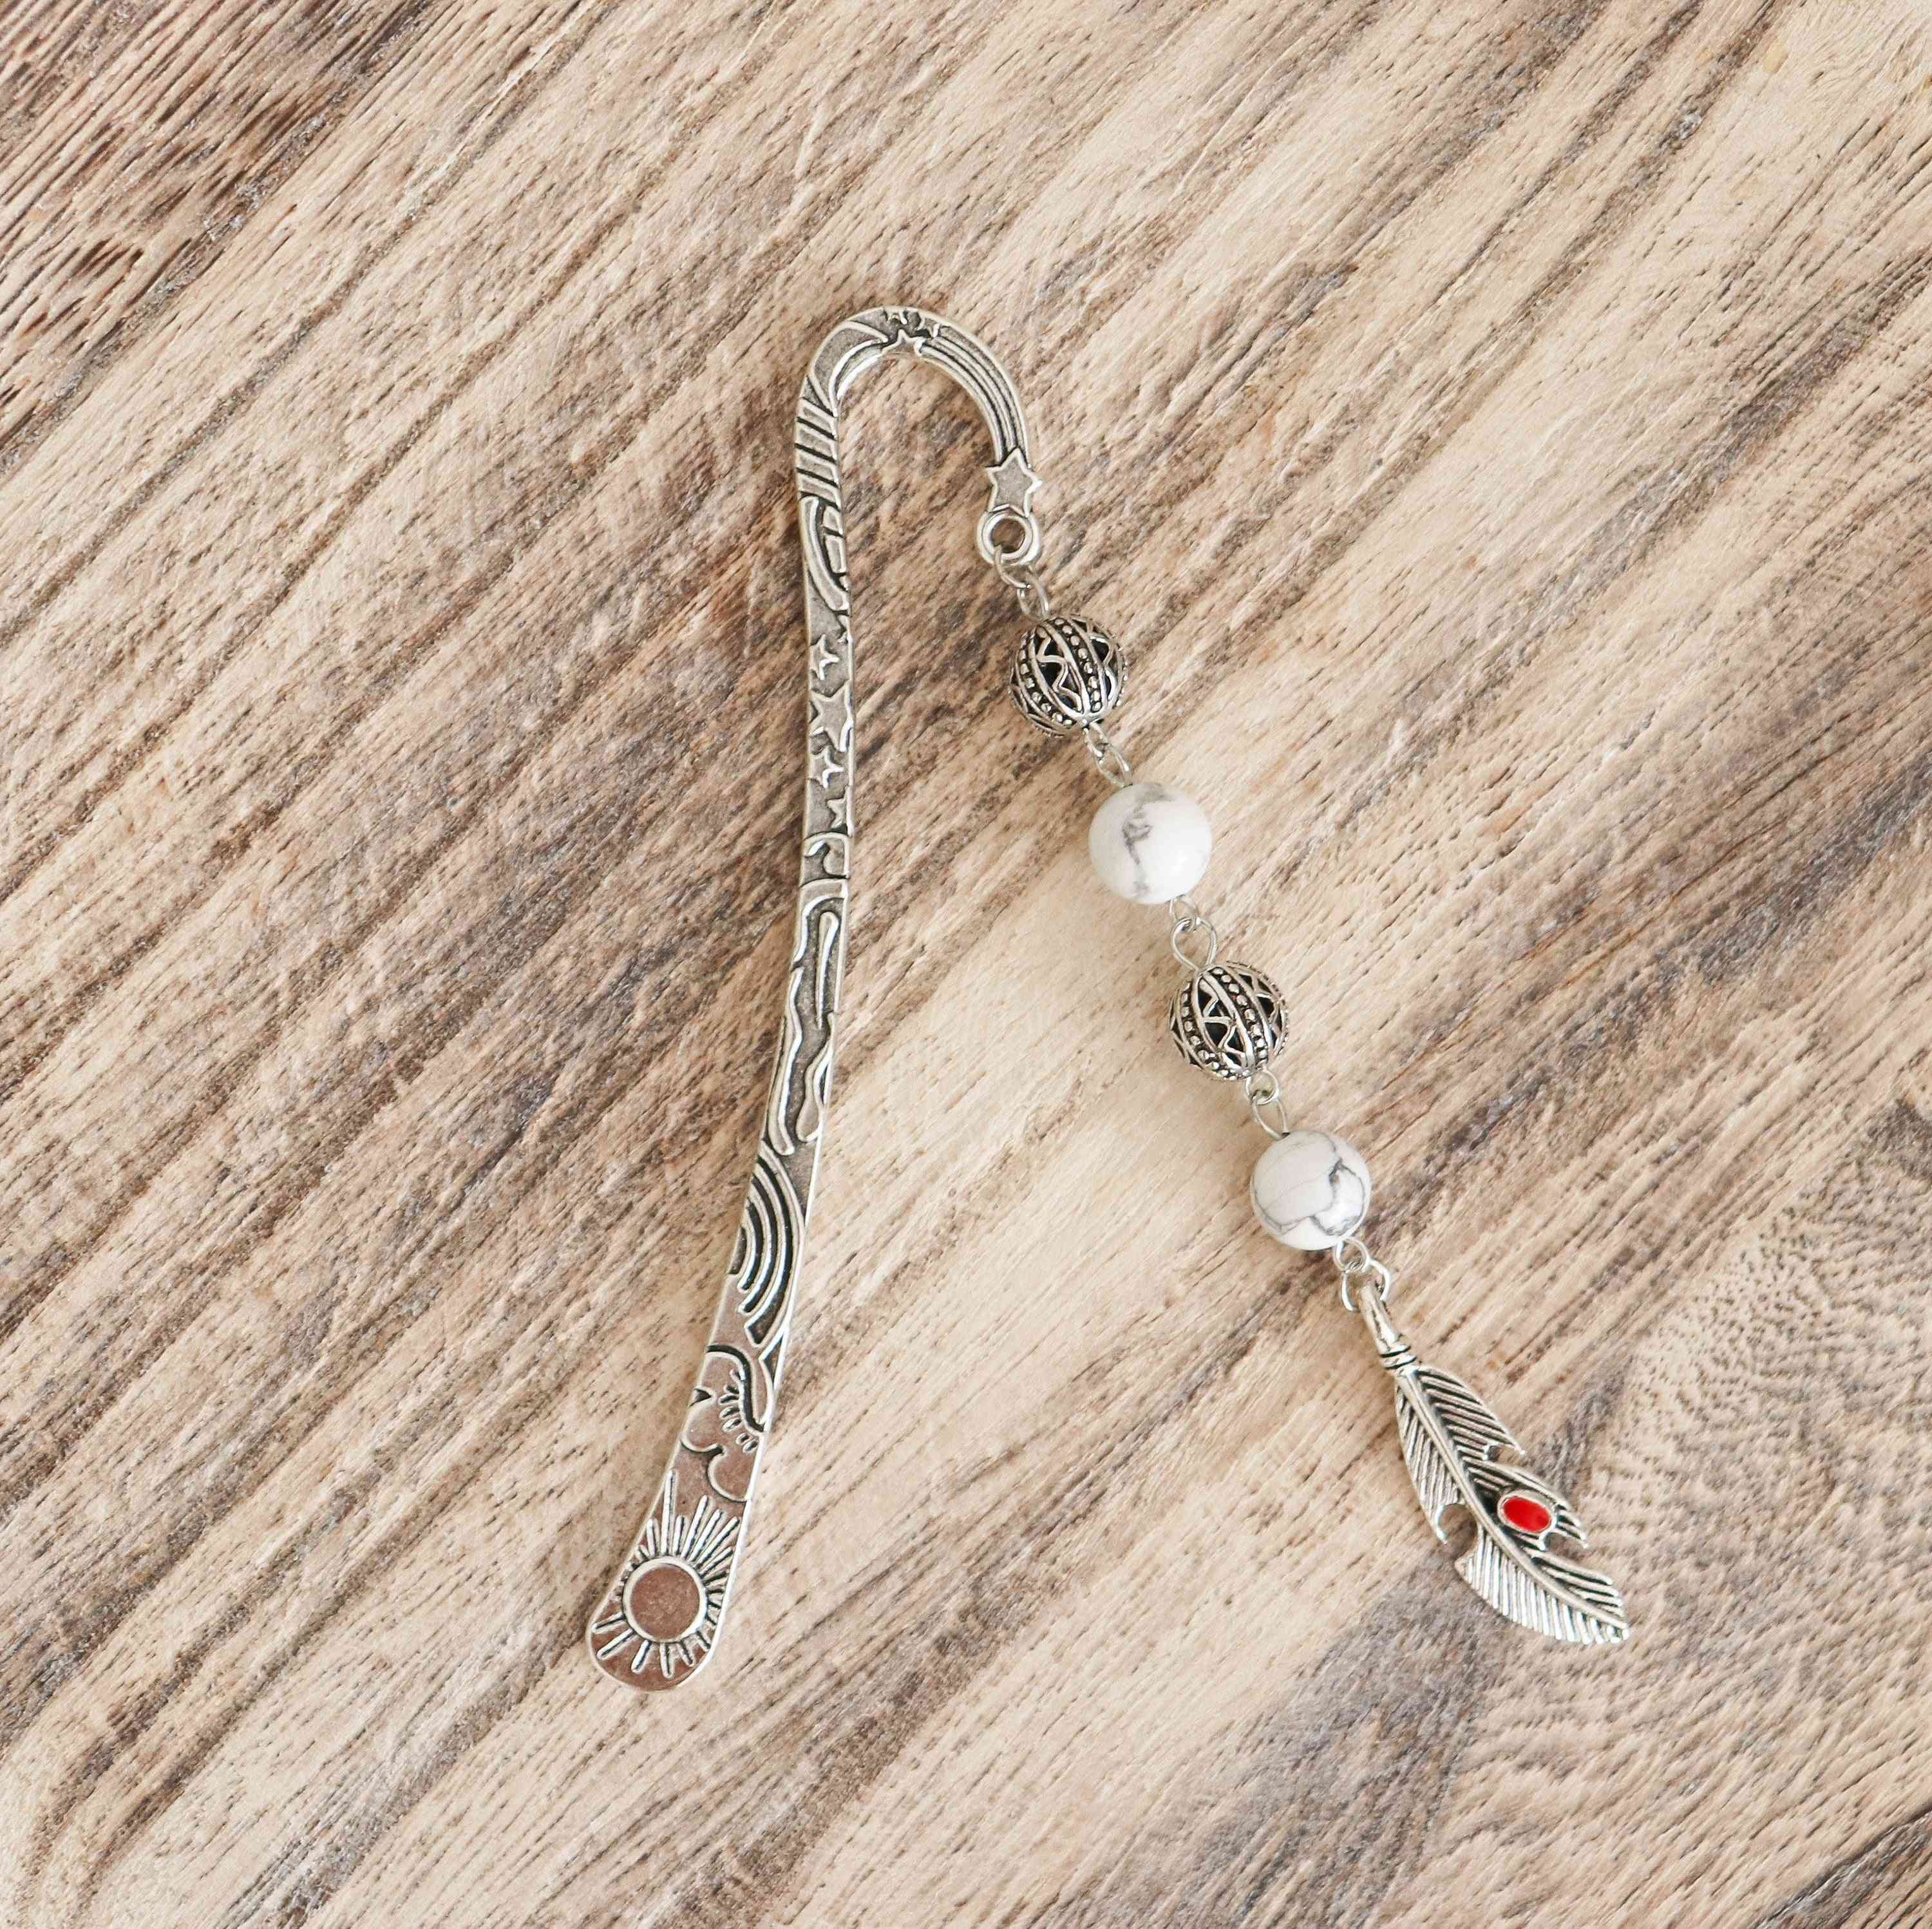 Rigid Bookmark Decorated With Charms And Fine Stones